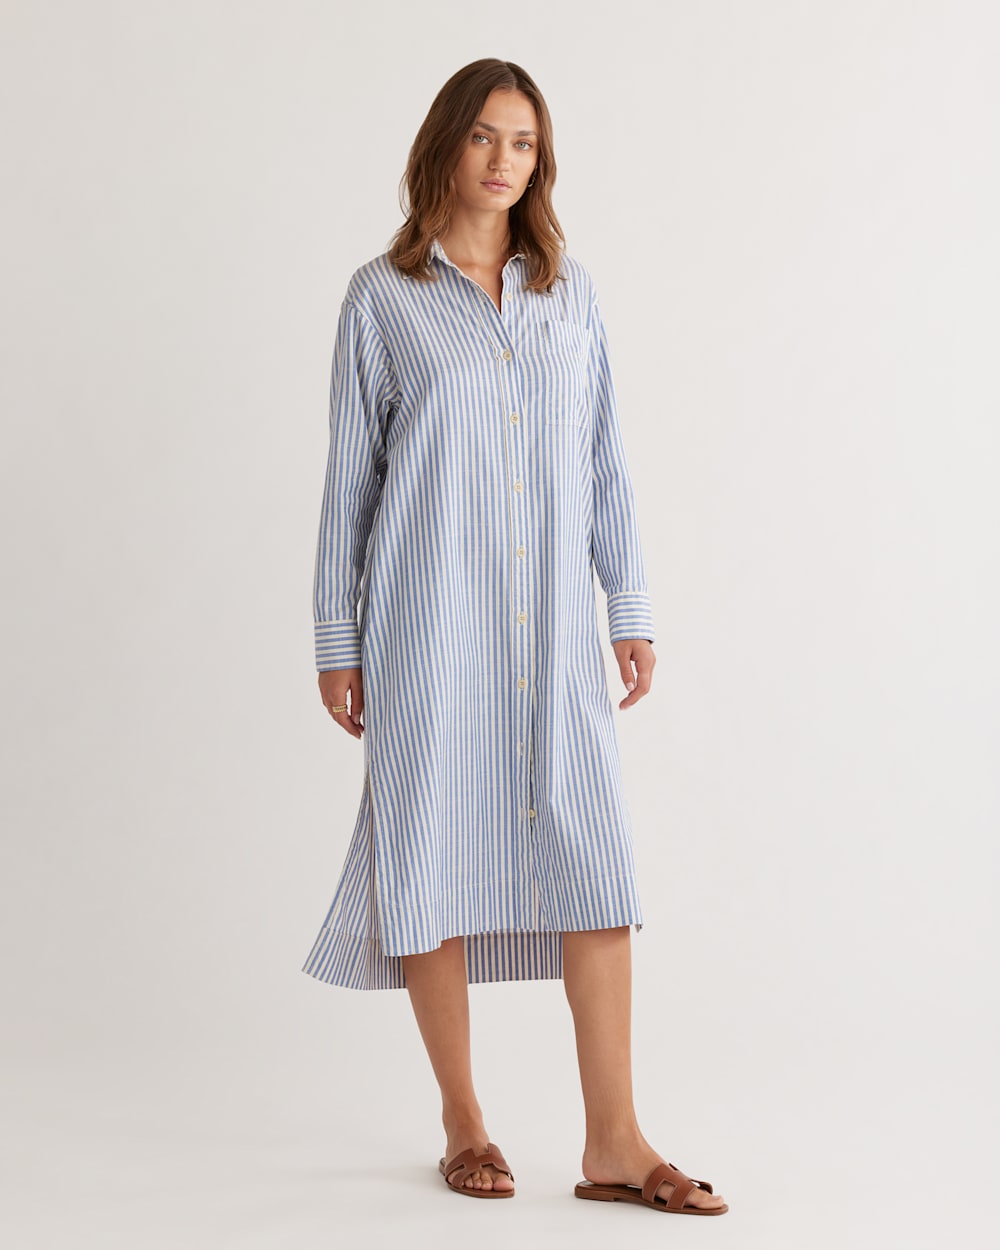 ALTERNATE VIEW OF WOMEN'S BRENTWOOD OVERSIZED SHIRTDRESS IN BLUE/IVORY STRIPE image number 2